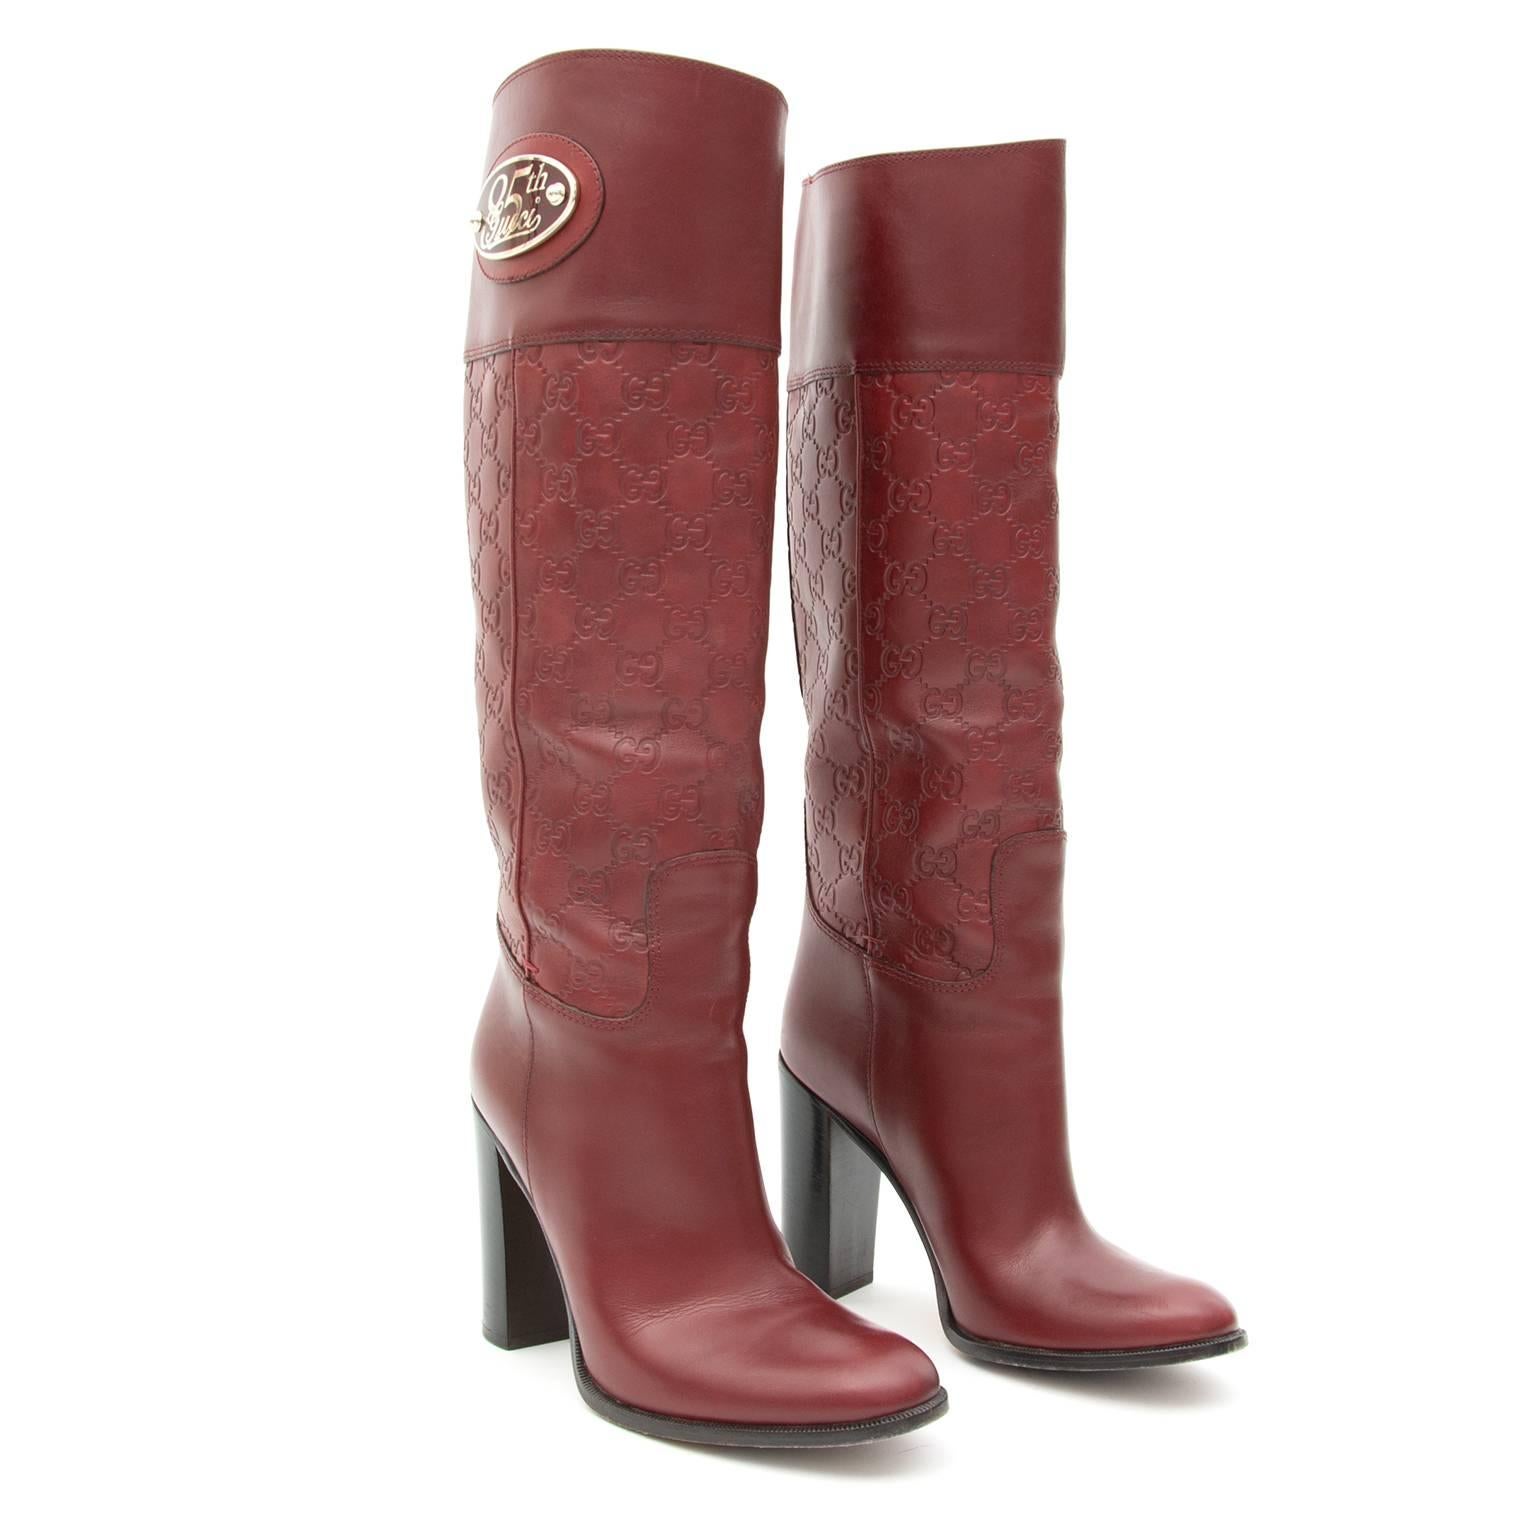 Gucci Monogram Leather Knee Boots

Gorgeous dark red boots with wooden heel by Italian house Gucci.

Embossed monogram print in sturdy but smooth leather.

Fits right under the knee. Size 3.

Comes in original box, with receipt and booklet.